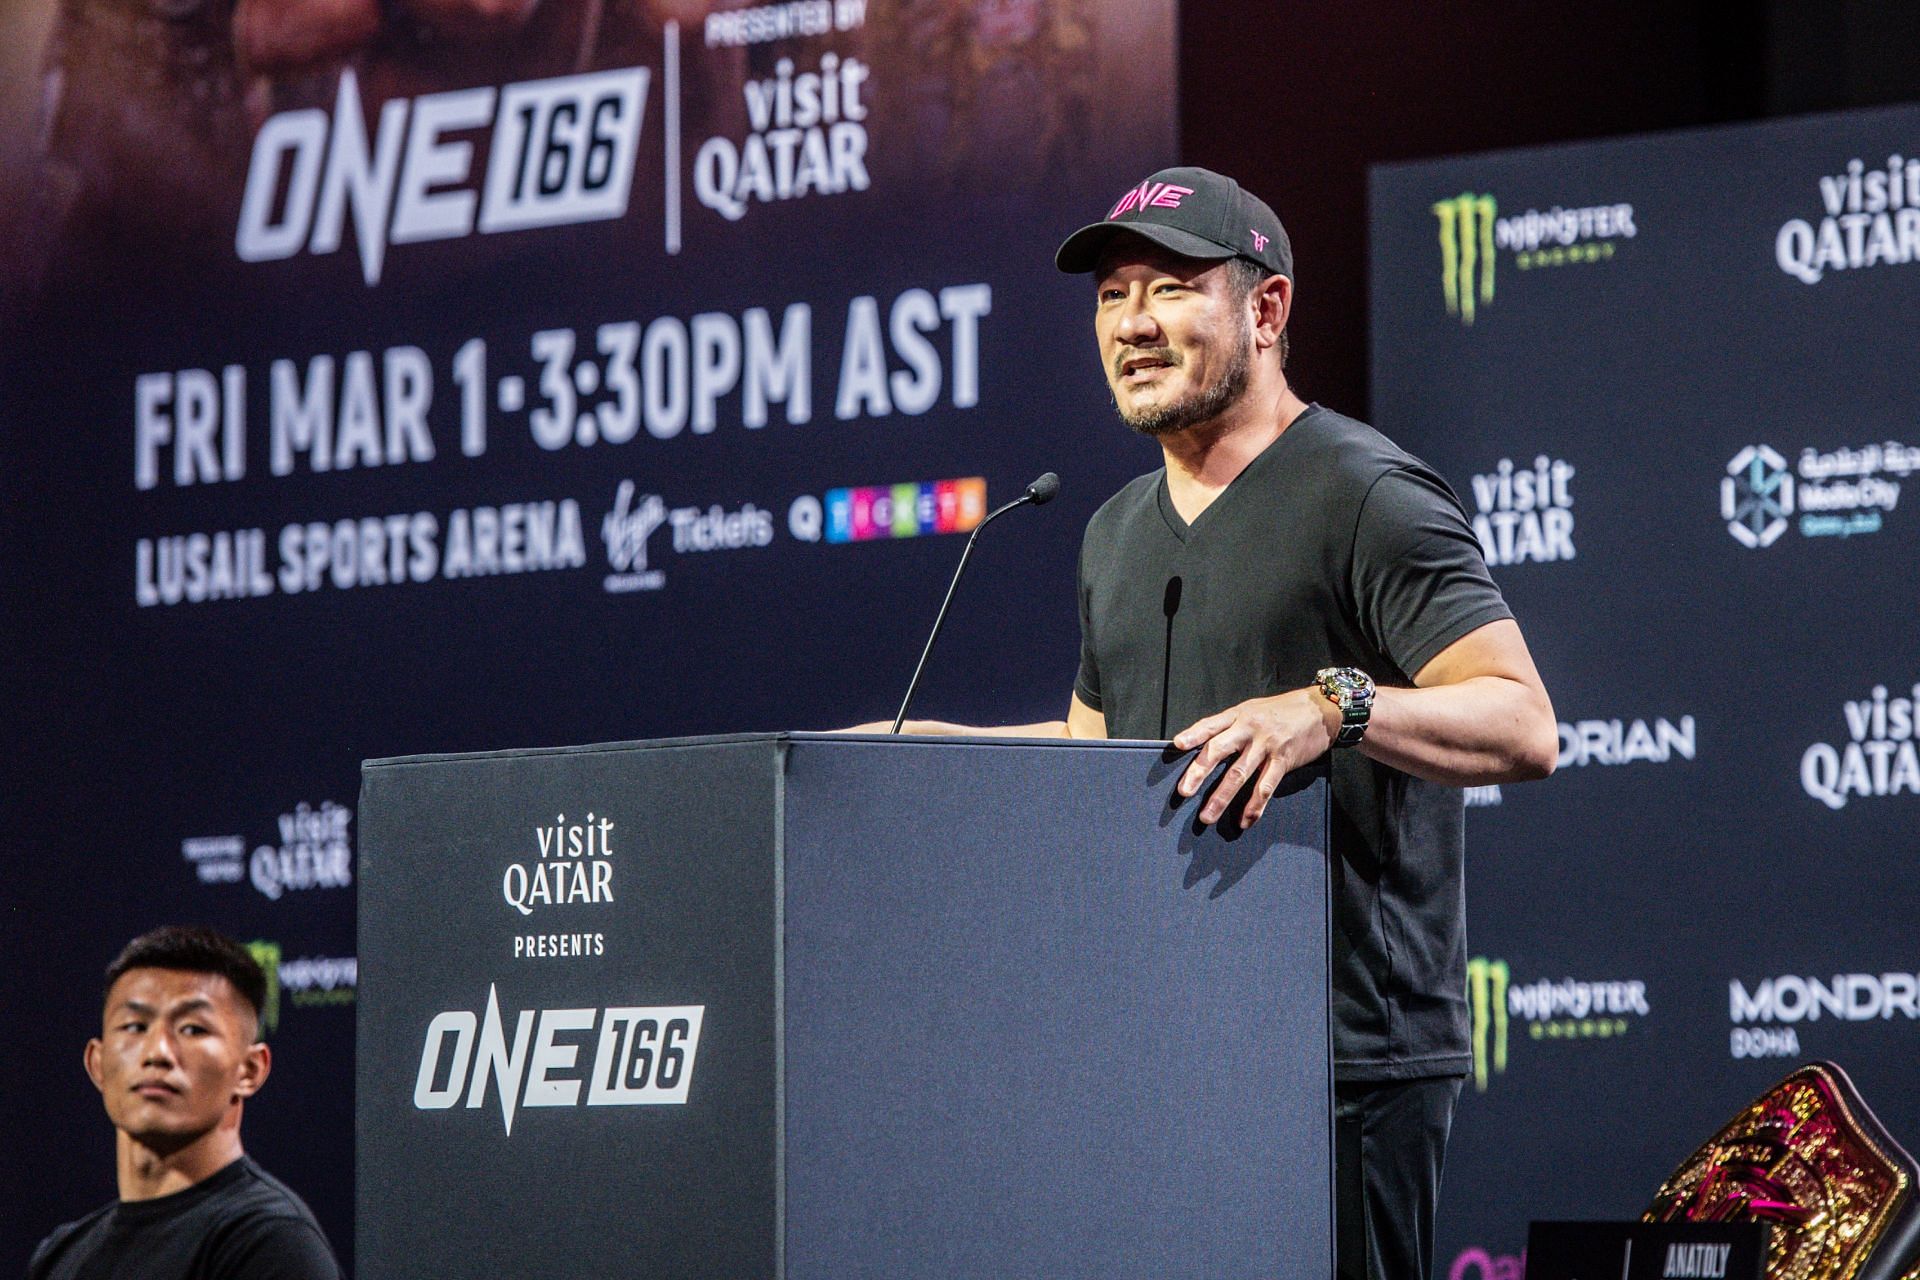 Chatri Sityodtong at the ONE 166 press conference in Doha.